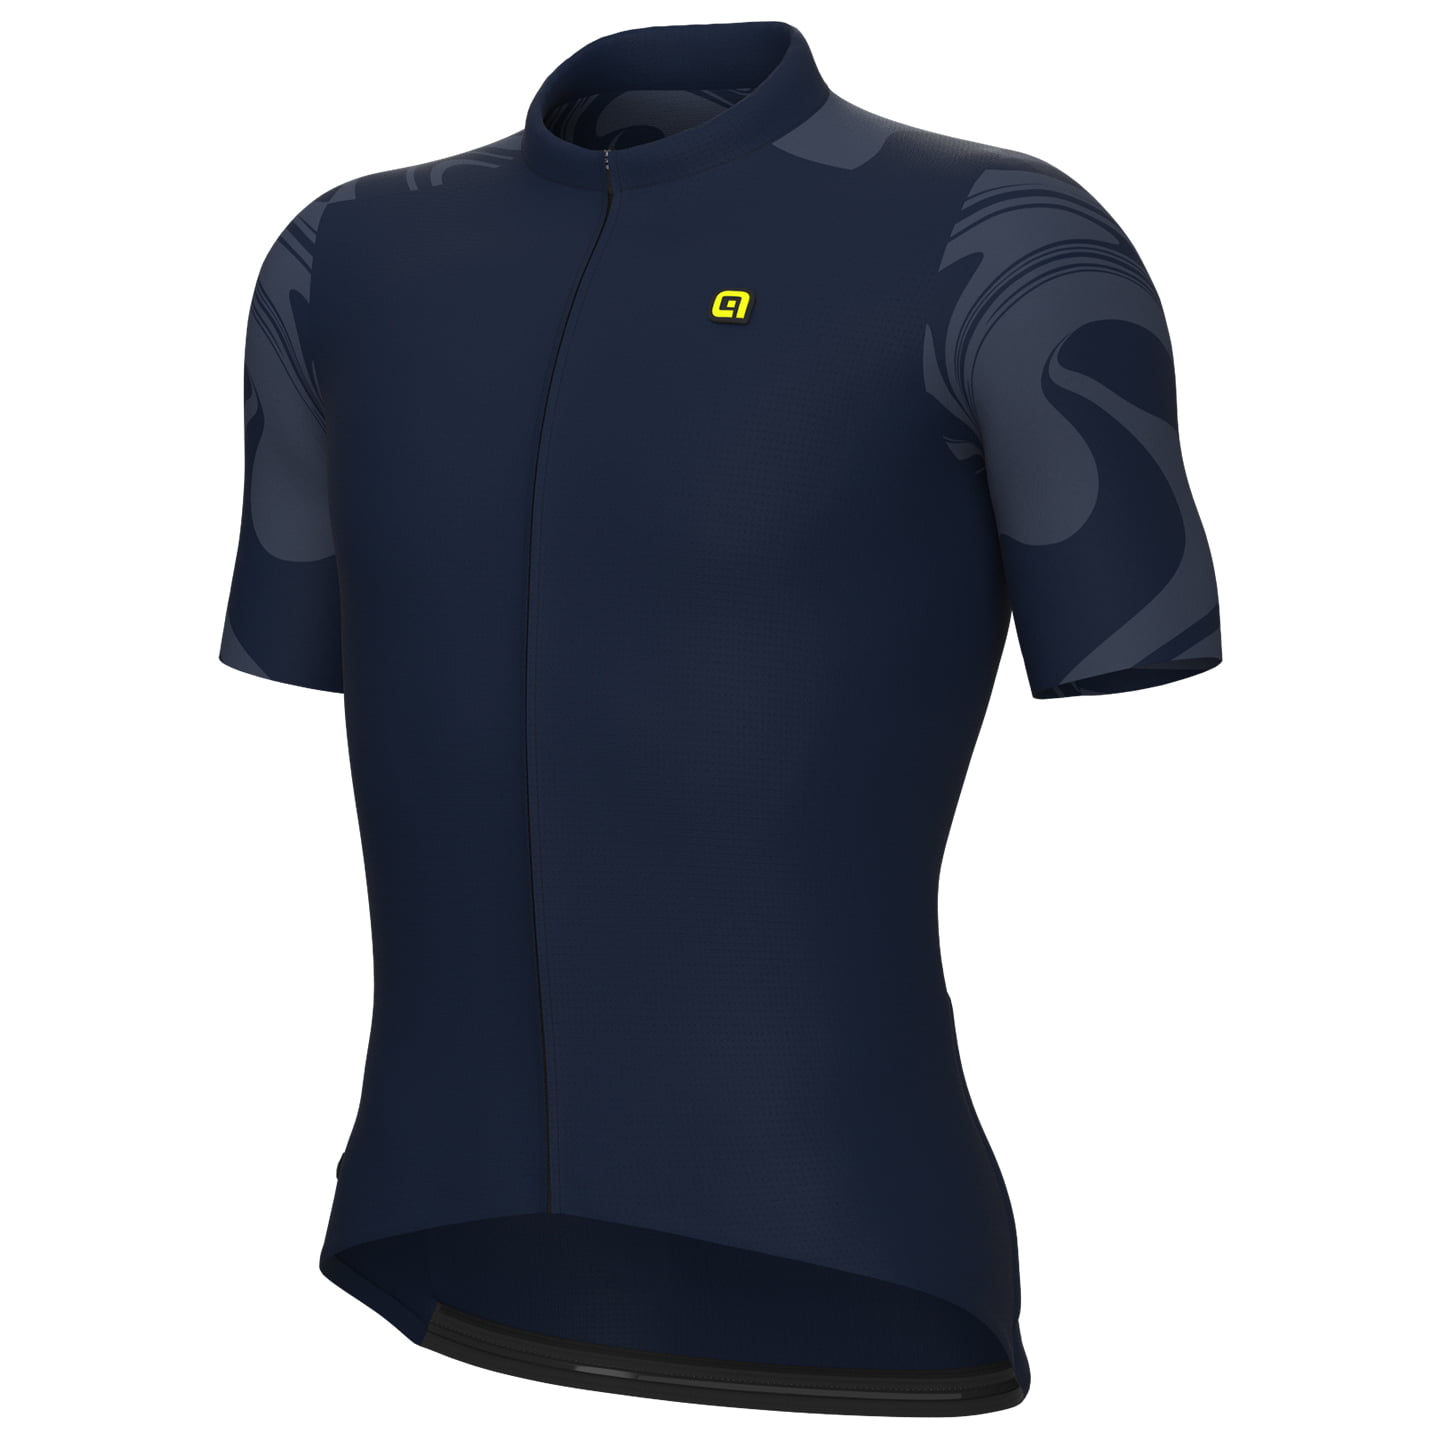 ALE Artika Short Sleeve Jersey, for men, size M, Cycling jersey, Cycling clothing